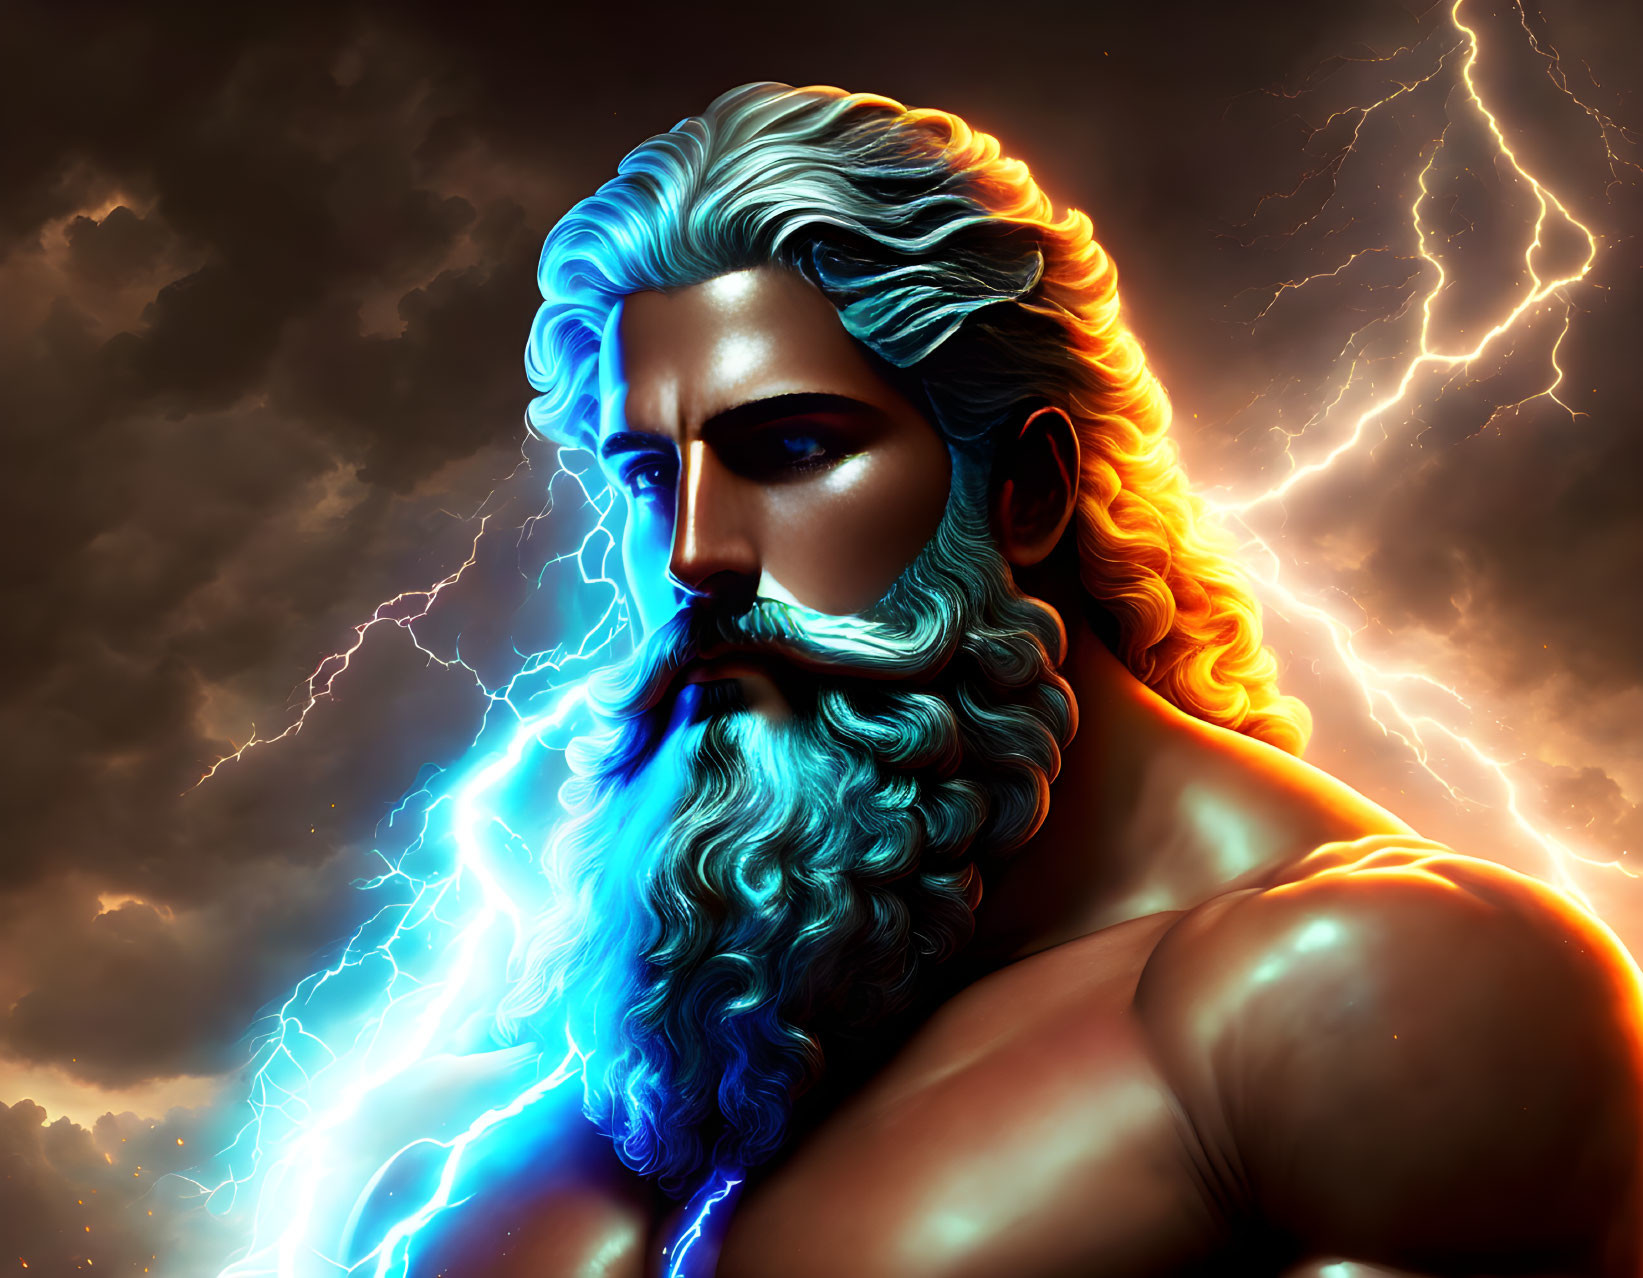 Muscular, Bearded Figure with Blue Energy in Stormy Skies